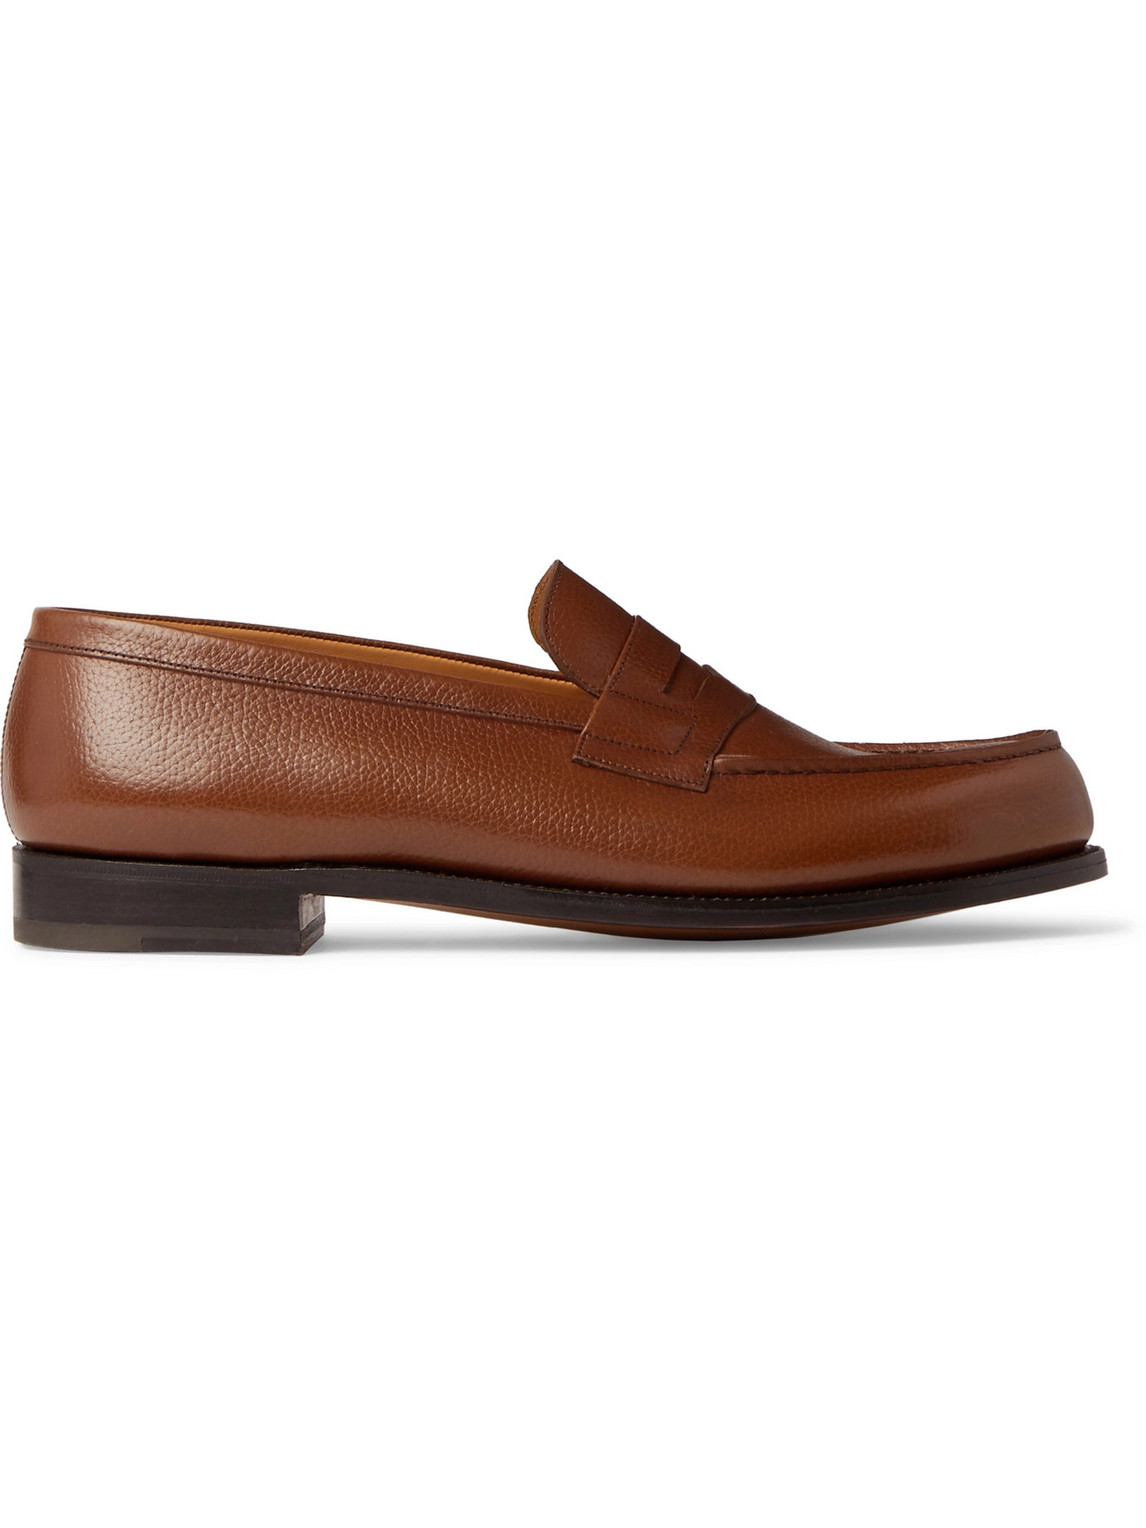 Jm Weston 180 Moccasin Full-grain Leather Loafers In Brown